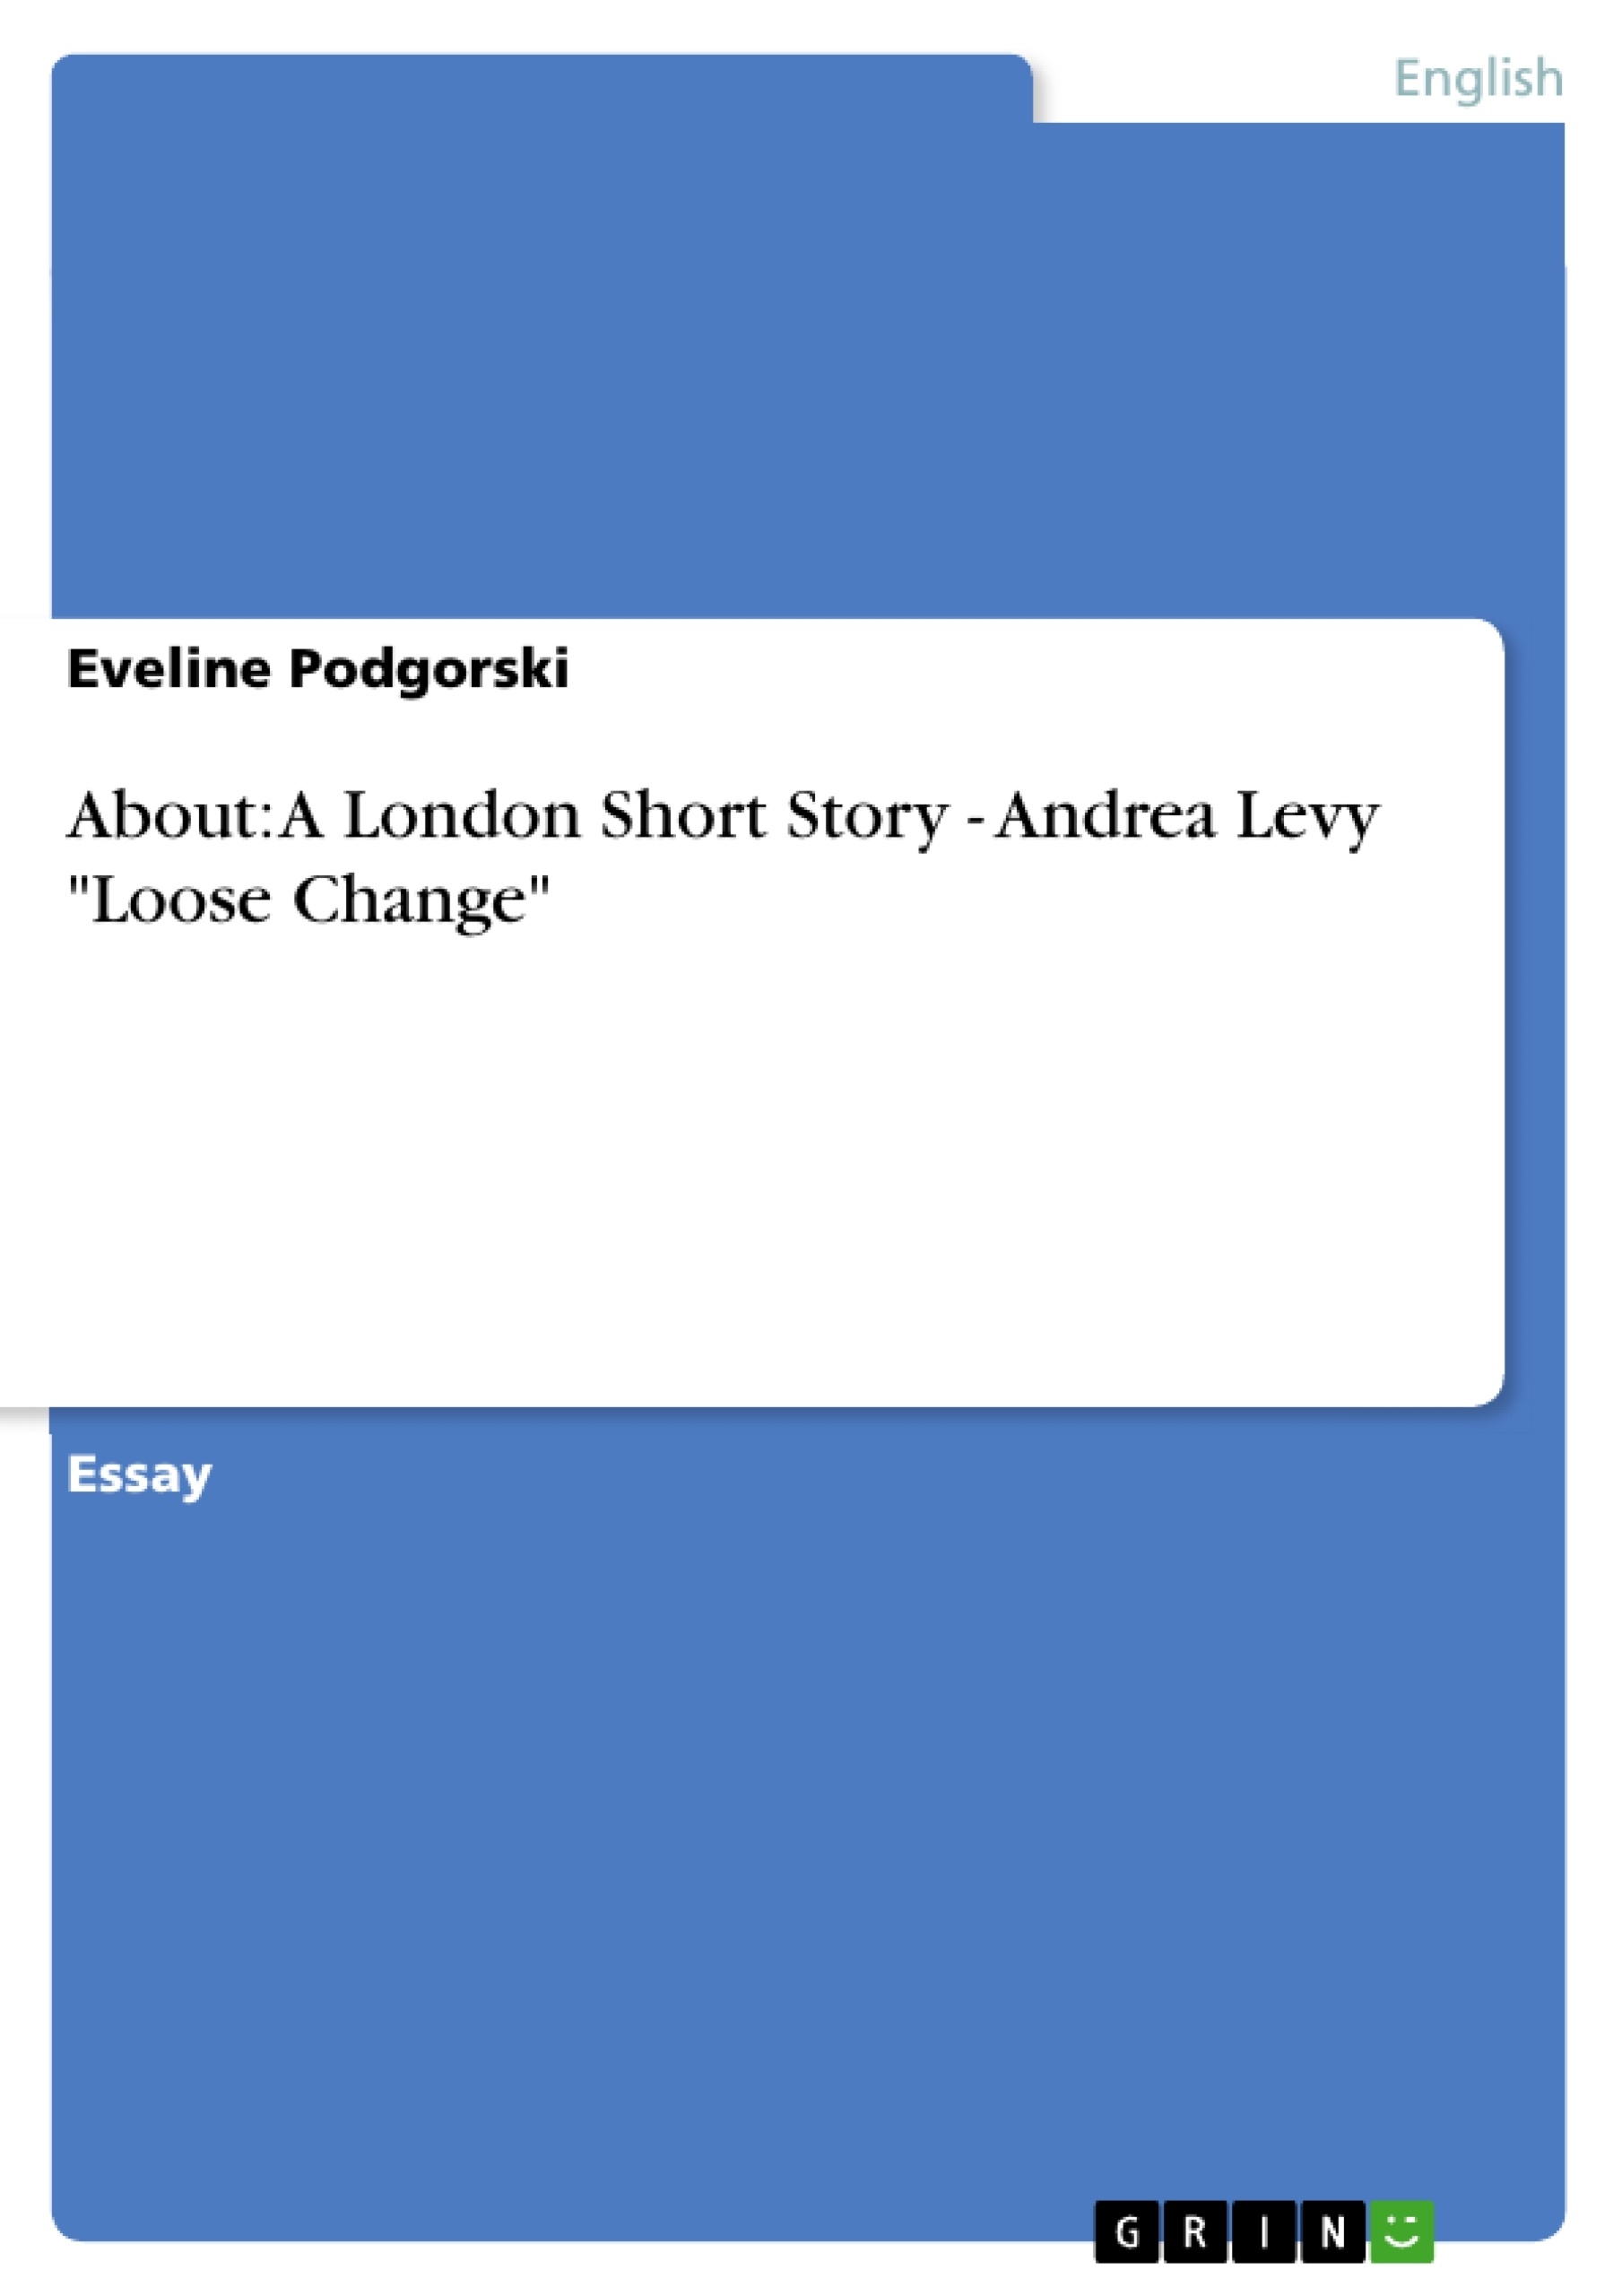 Título: About: A London Short Story - Andrea Levy "Loose Change"